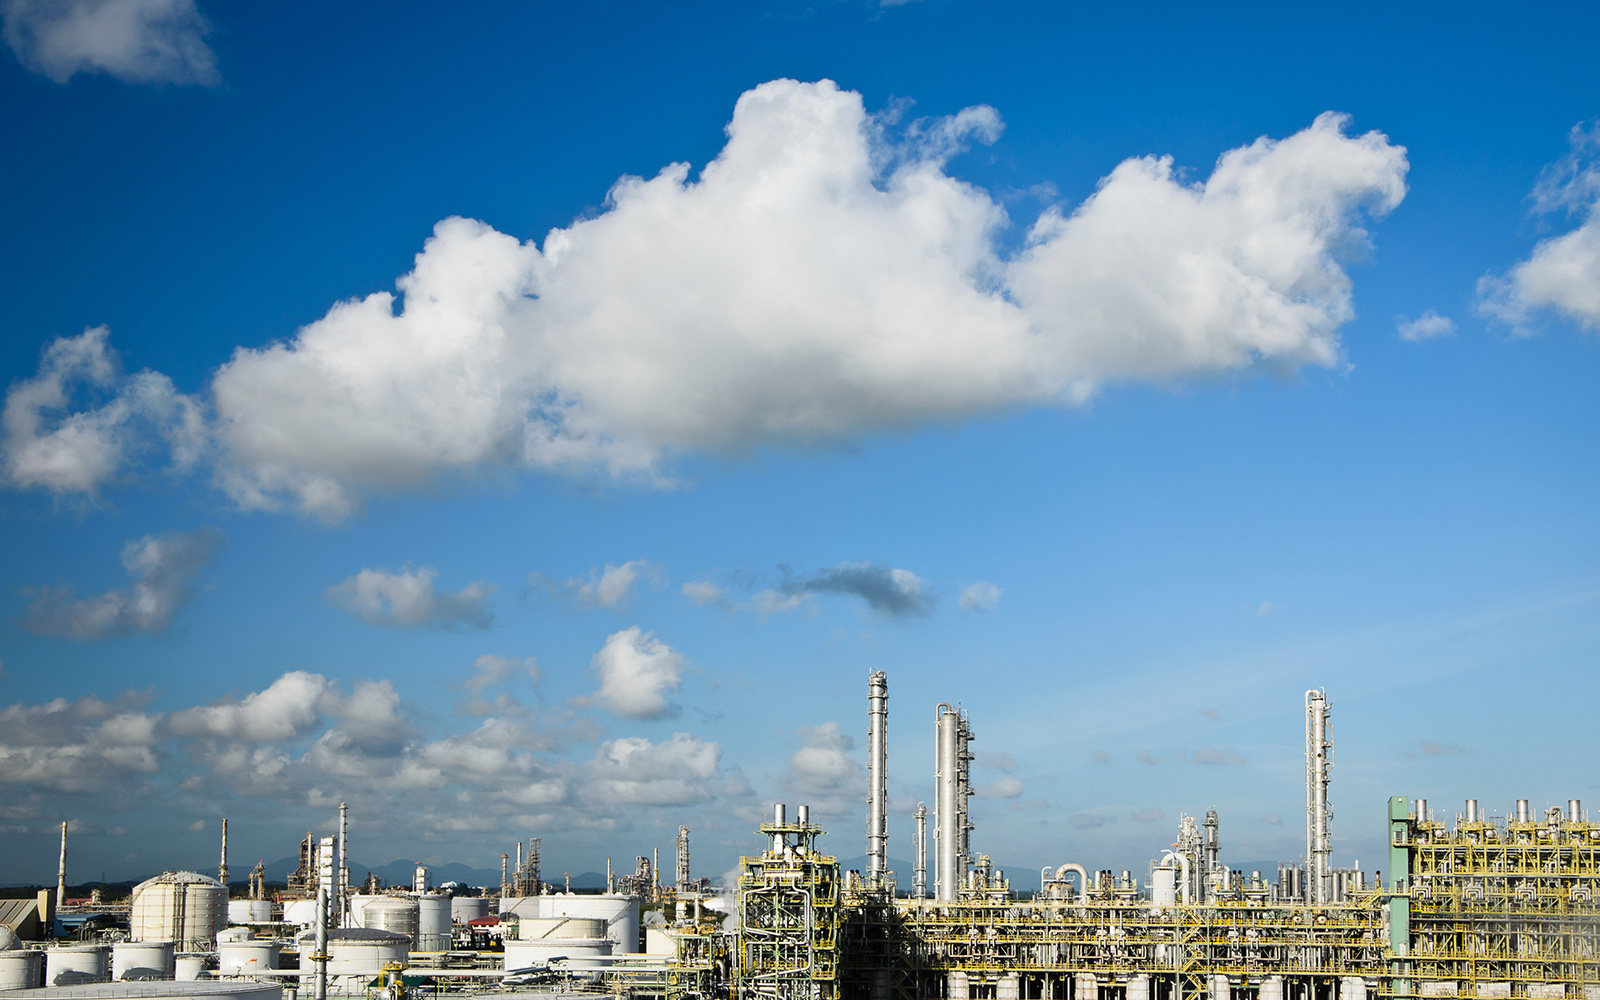 Petrochemical plant below a blue sky with clouds